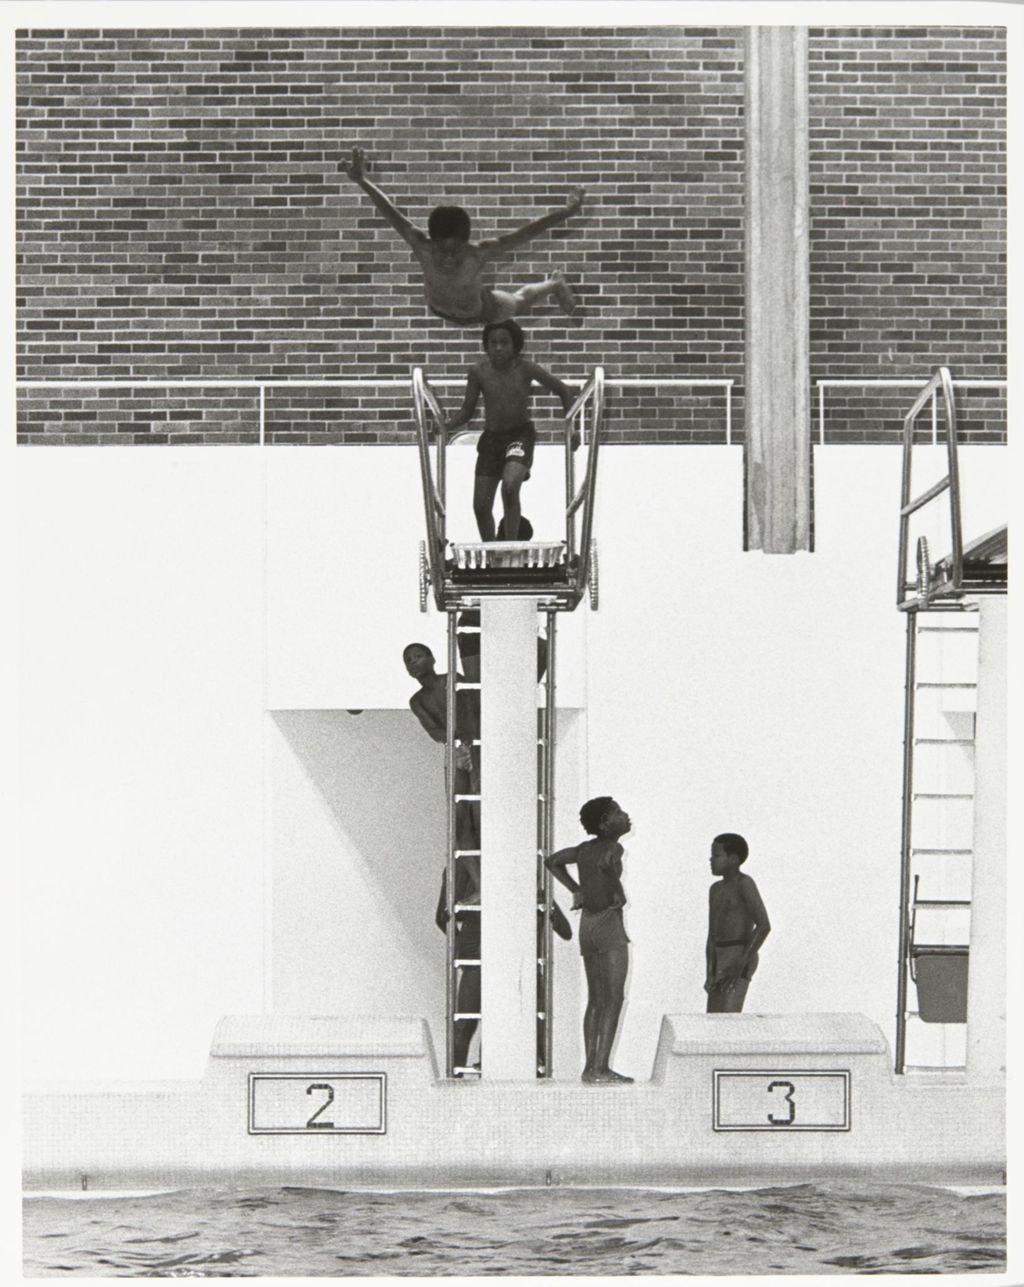 Miniature of People on the diving board during Mayor Richard J. Daley's Girls Summer Program